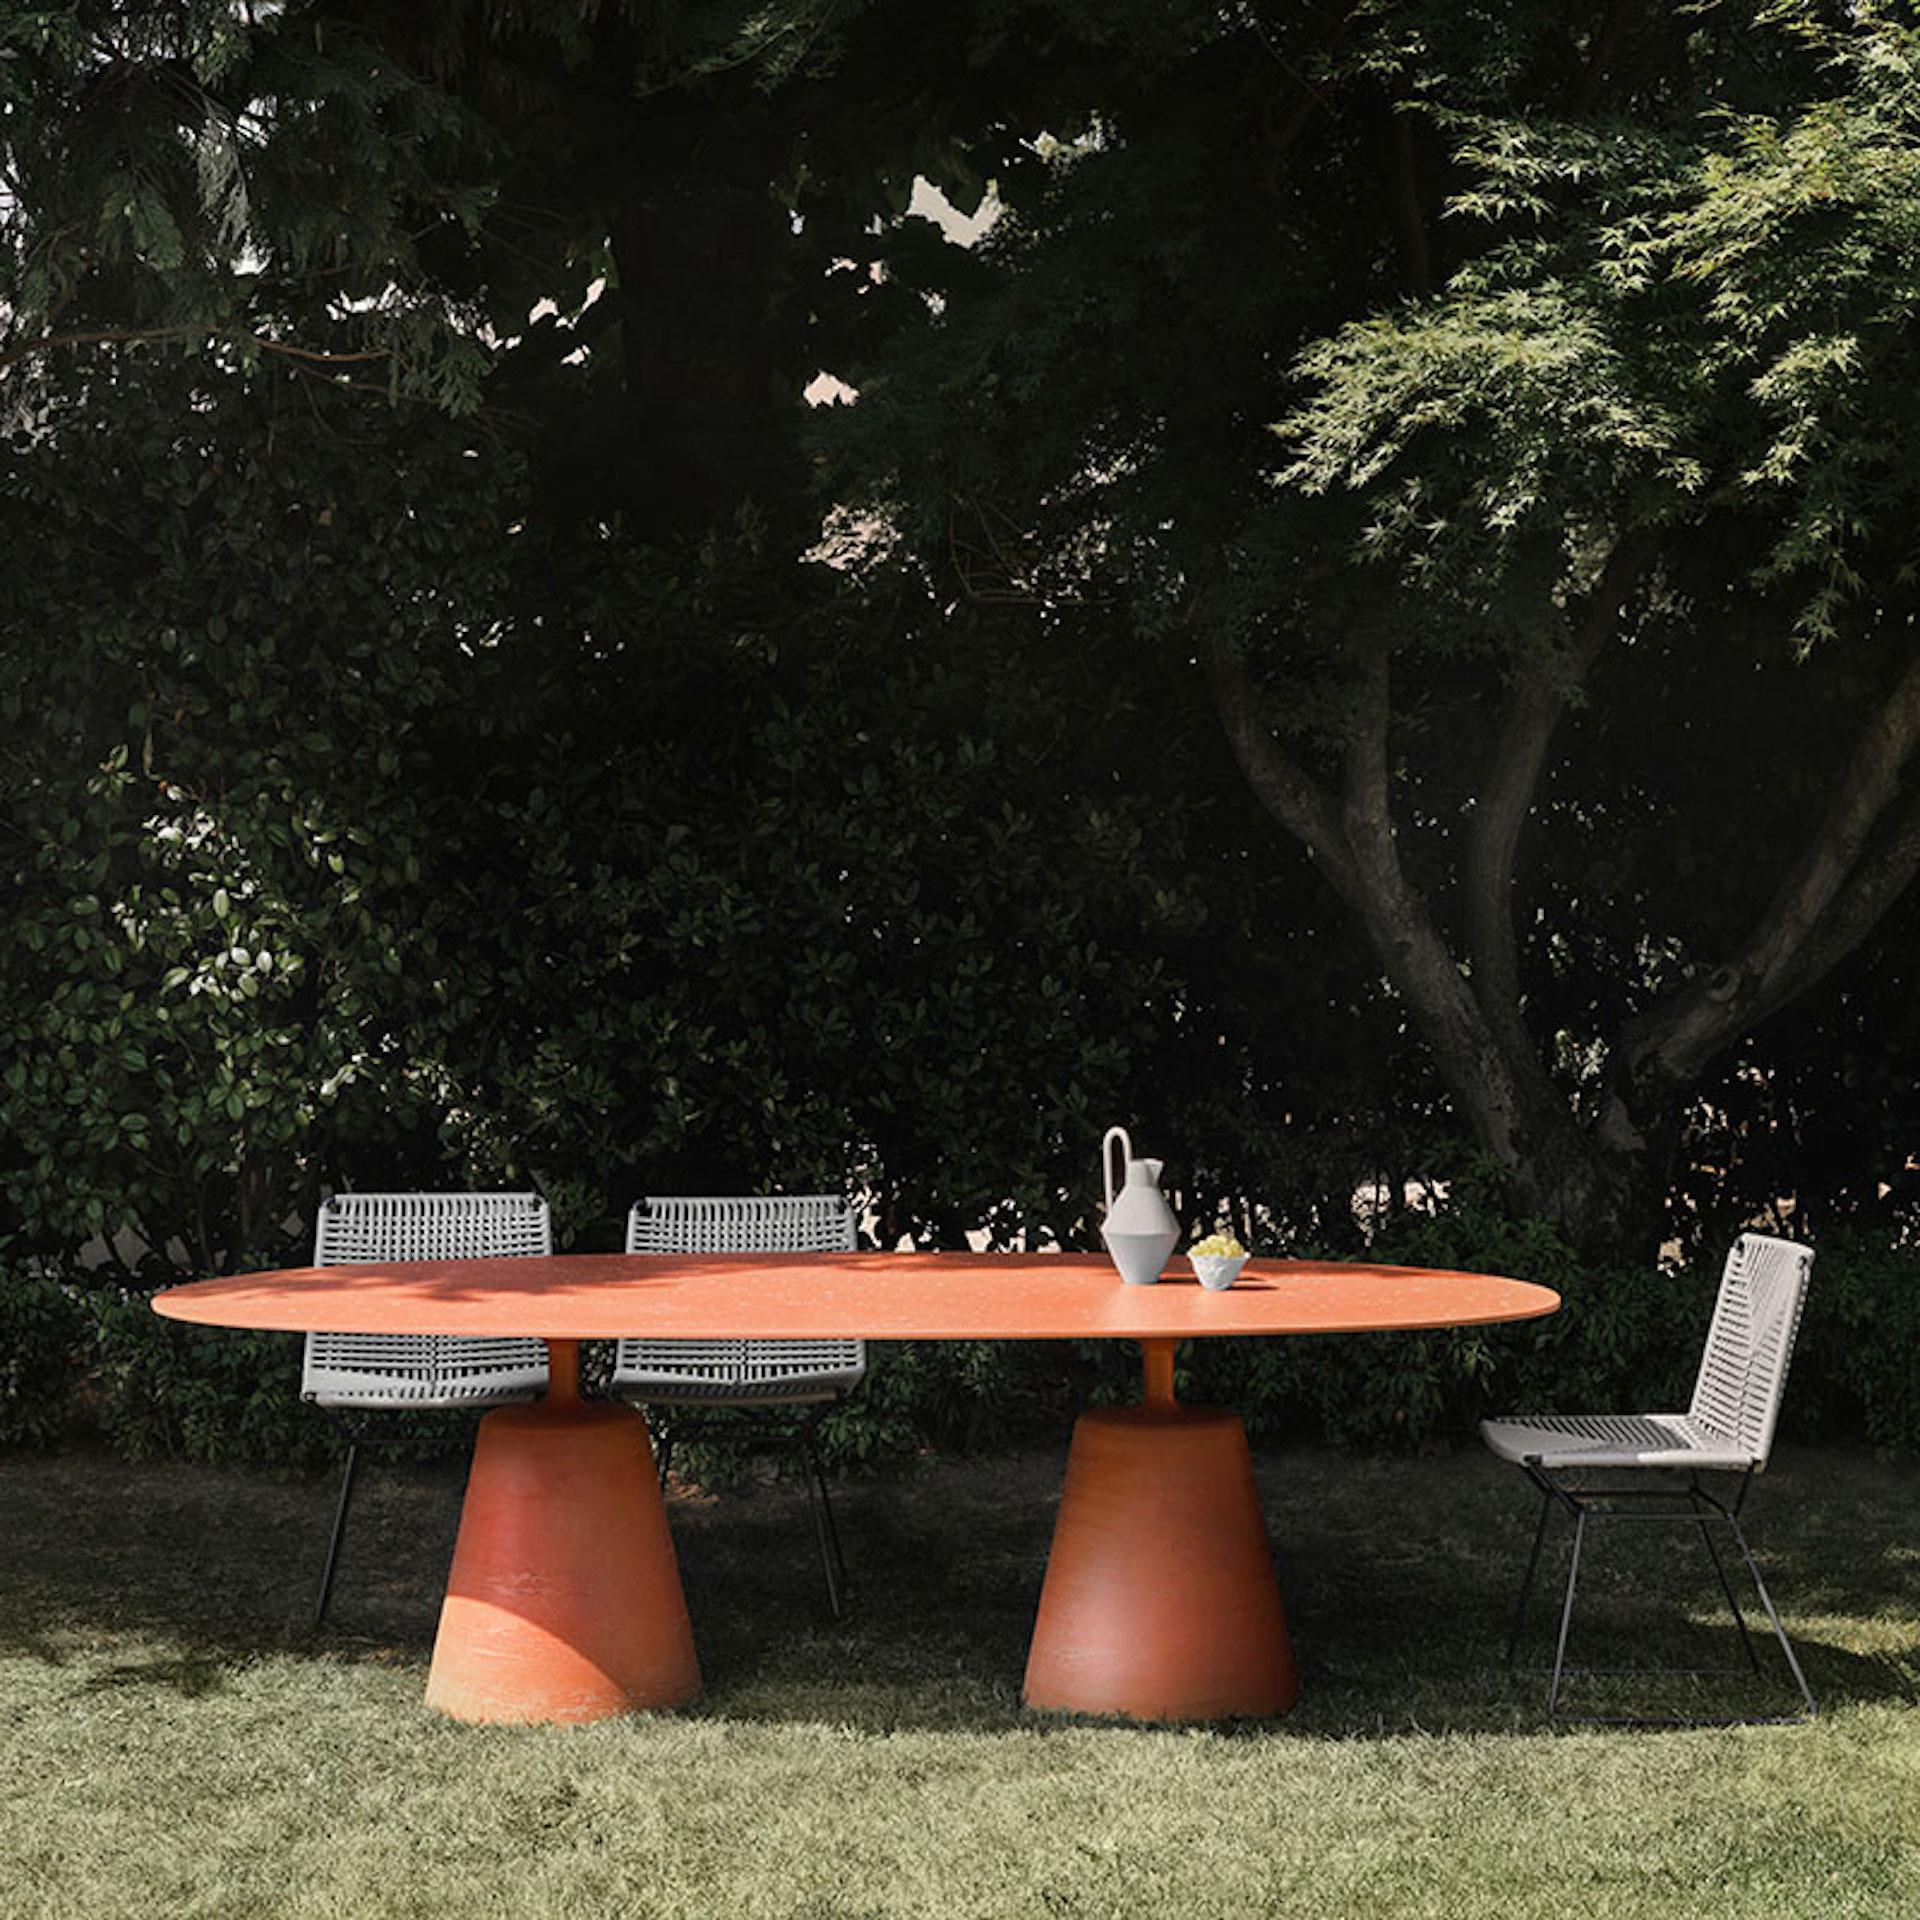 Rock Table is a family of indoor and outdoor tables with an elegant, fluid silhouette, characterised by a solid central conical base and a thin top that appears to float. The new model features a top with an unusual and interesting shape: a